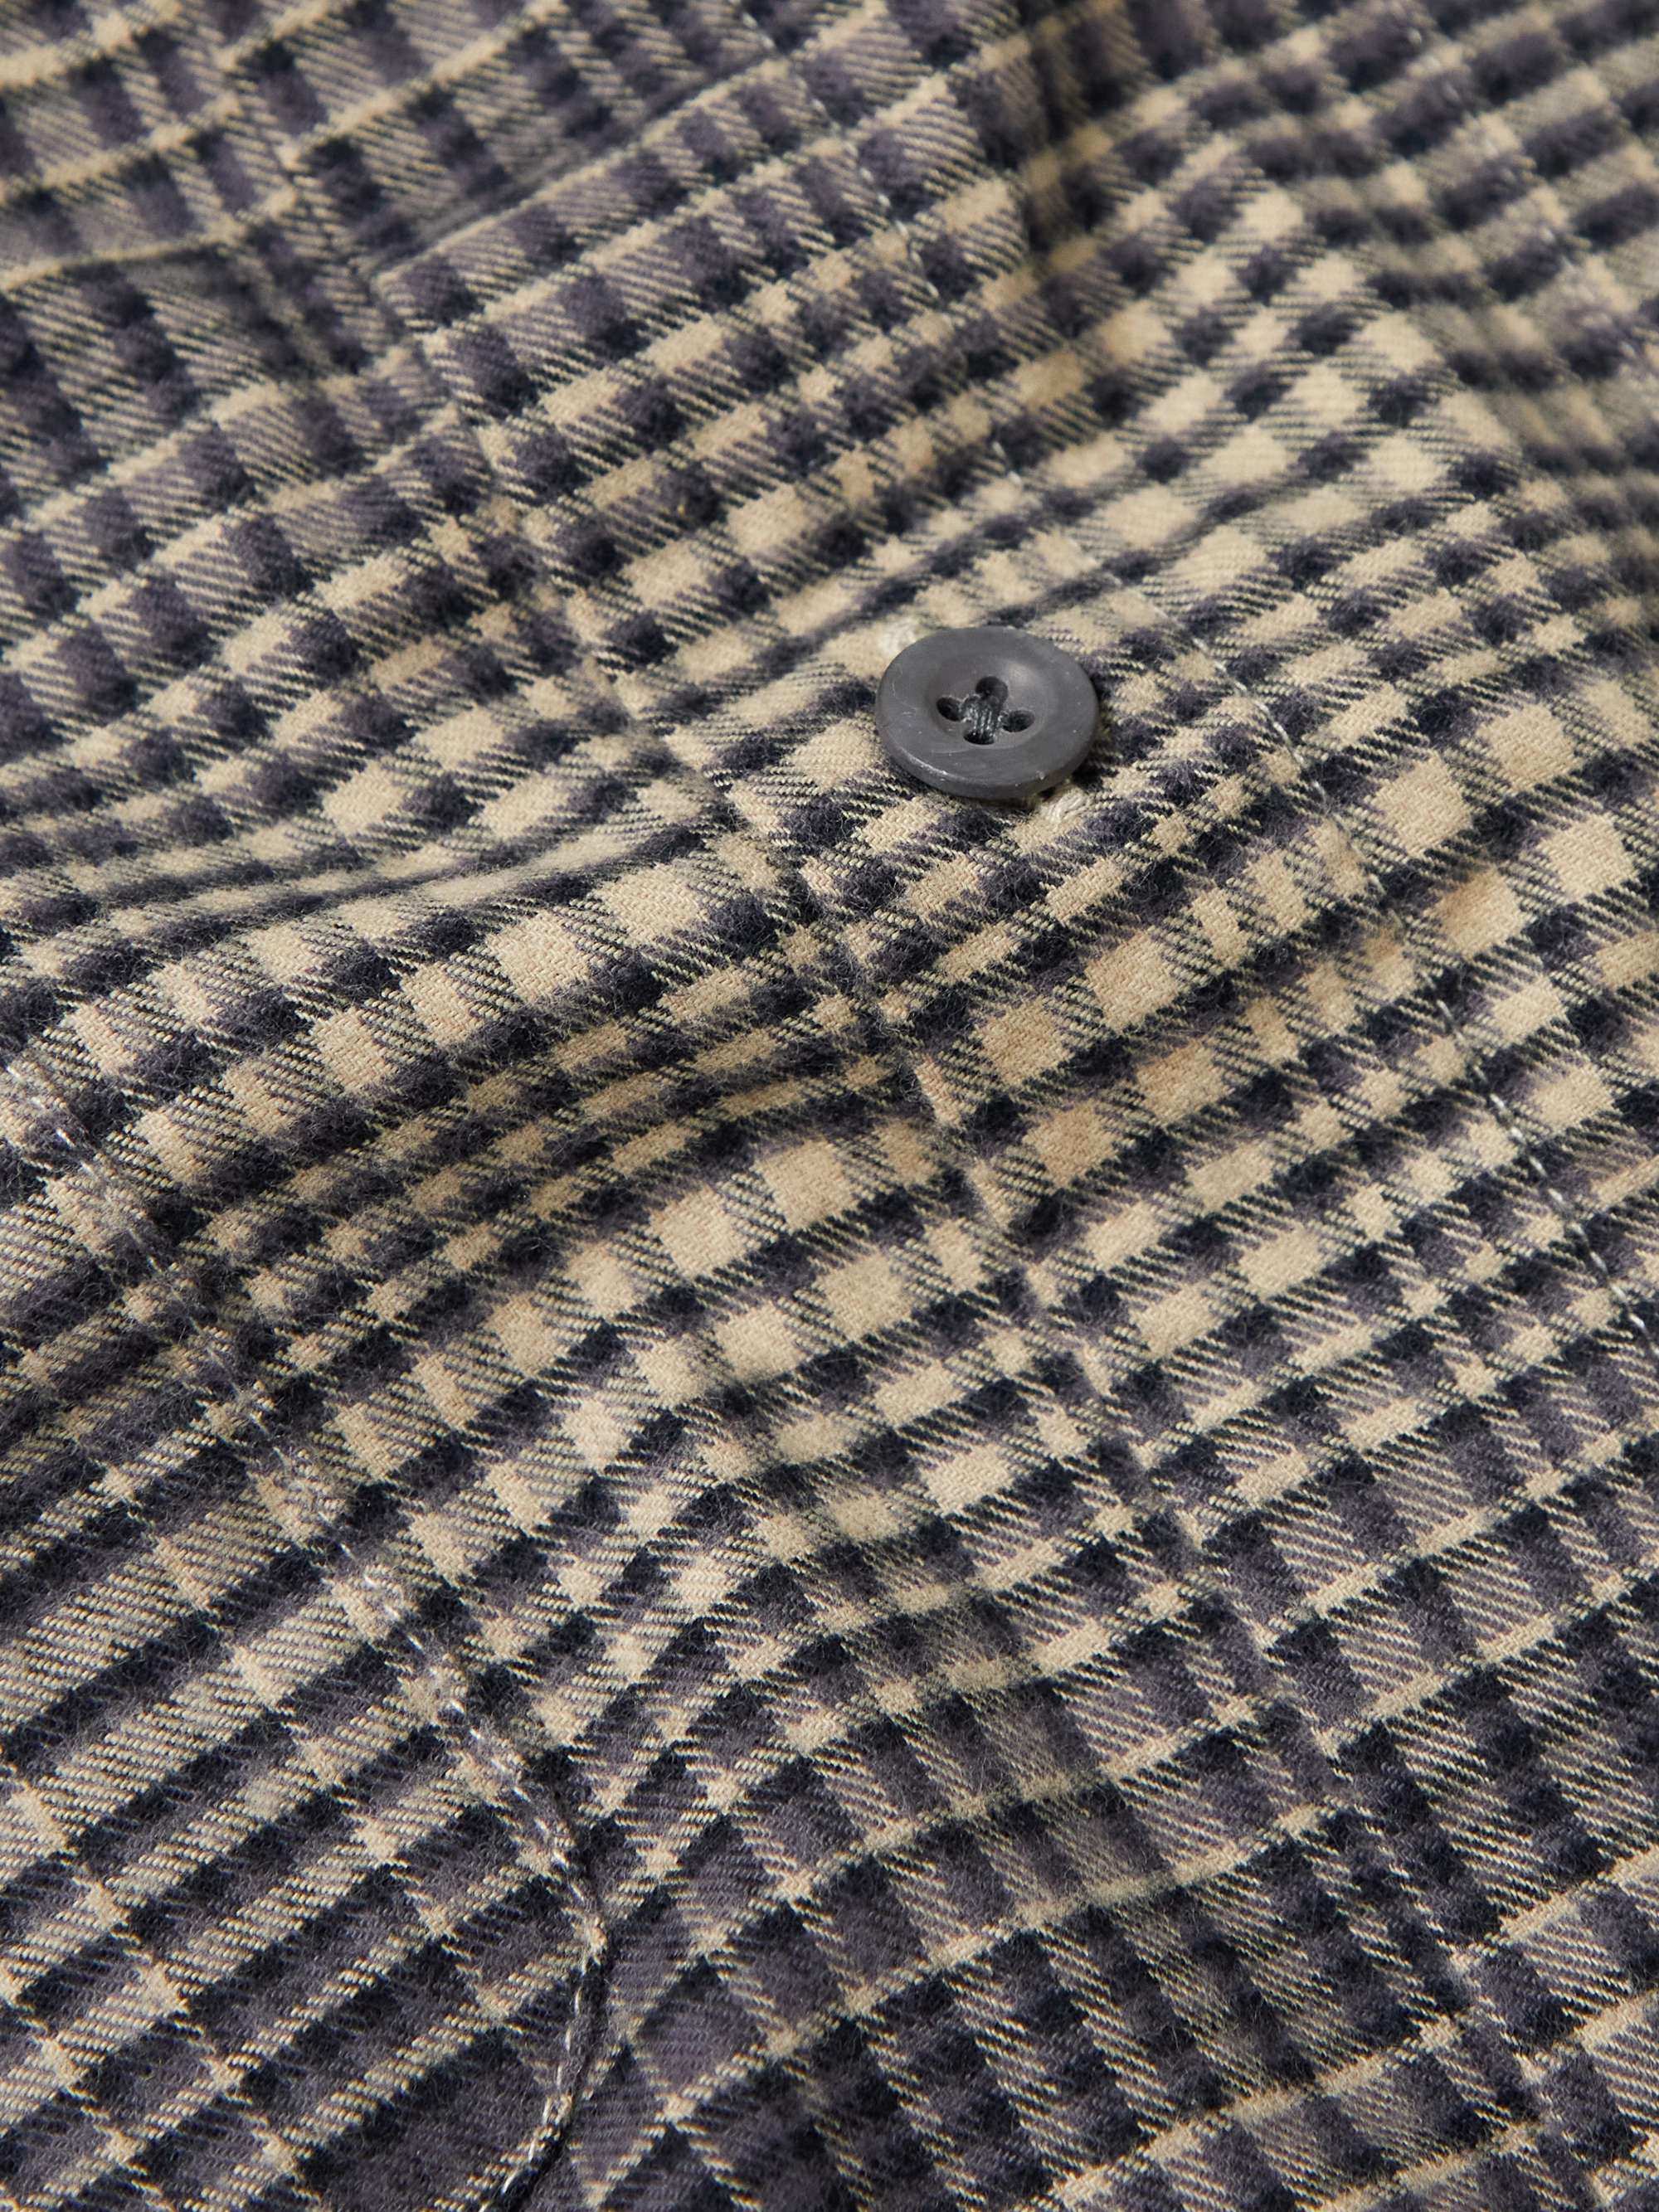 MR P. Checked Cotton-Flannel Shirt